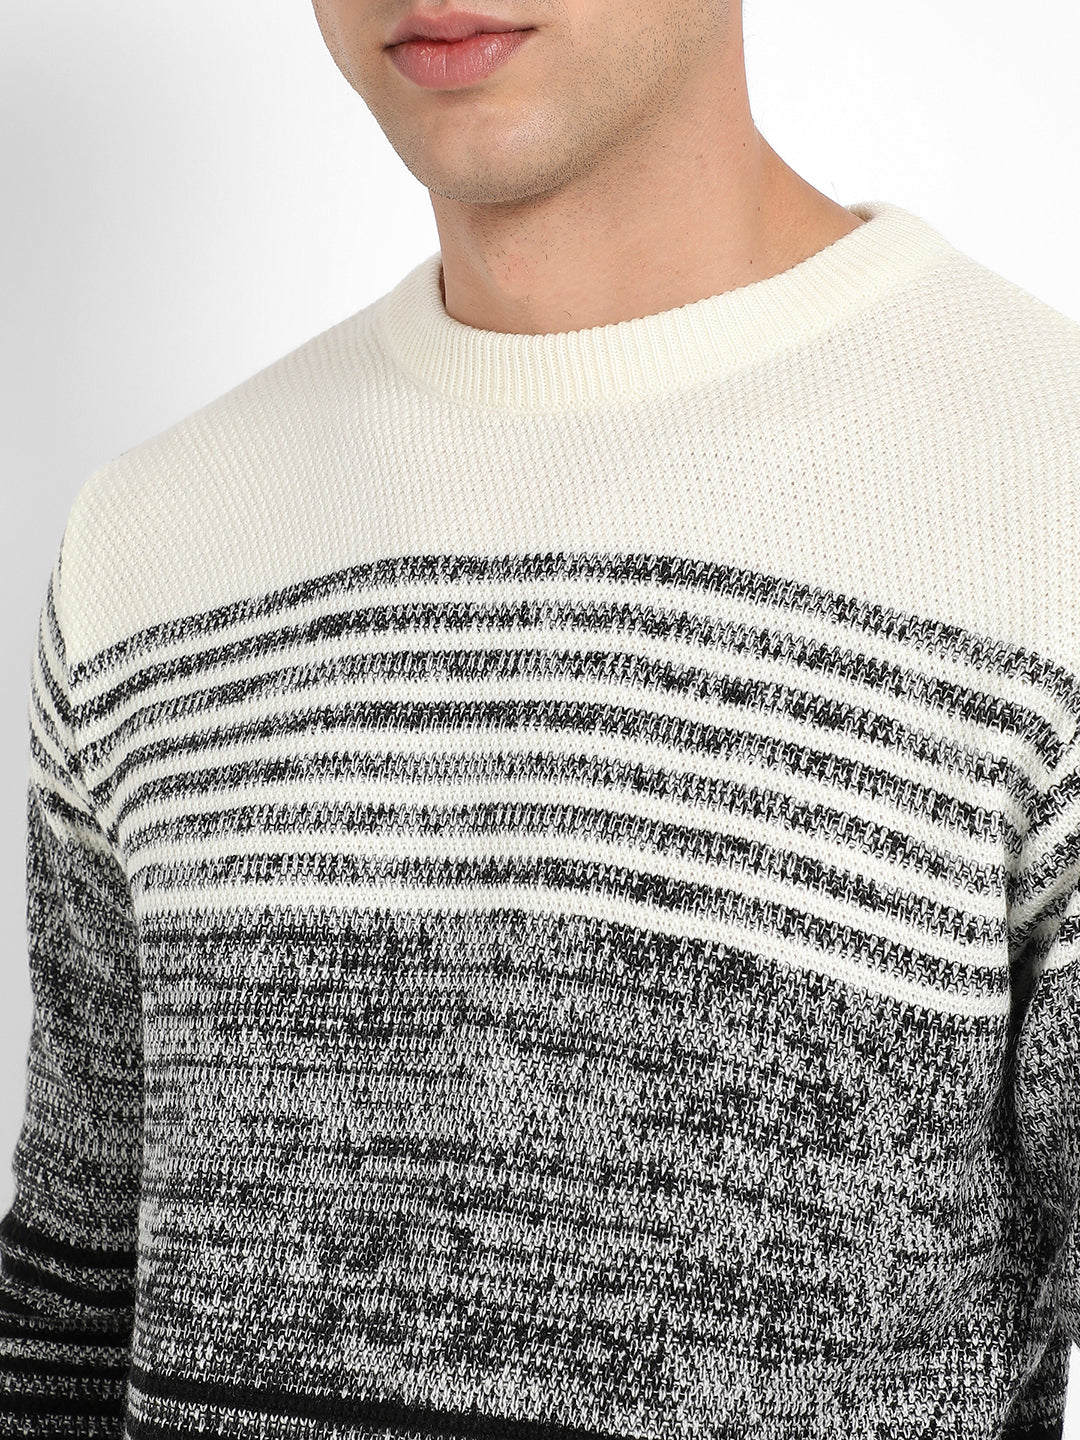 Men's Charcoal Grey Contrast Horizontal Striped Pullover Sweater